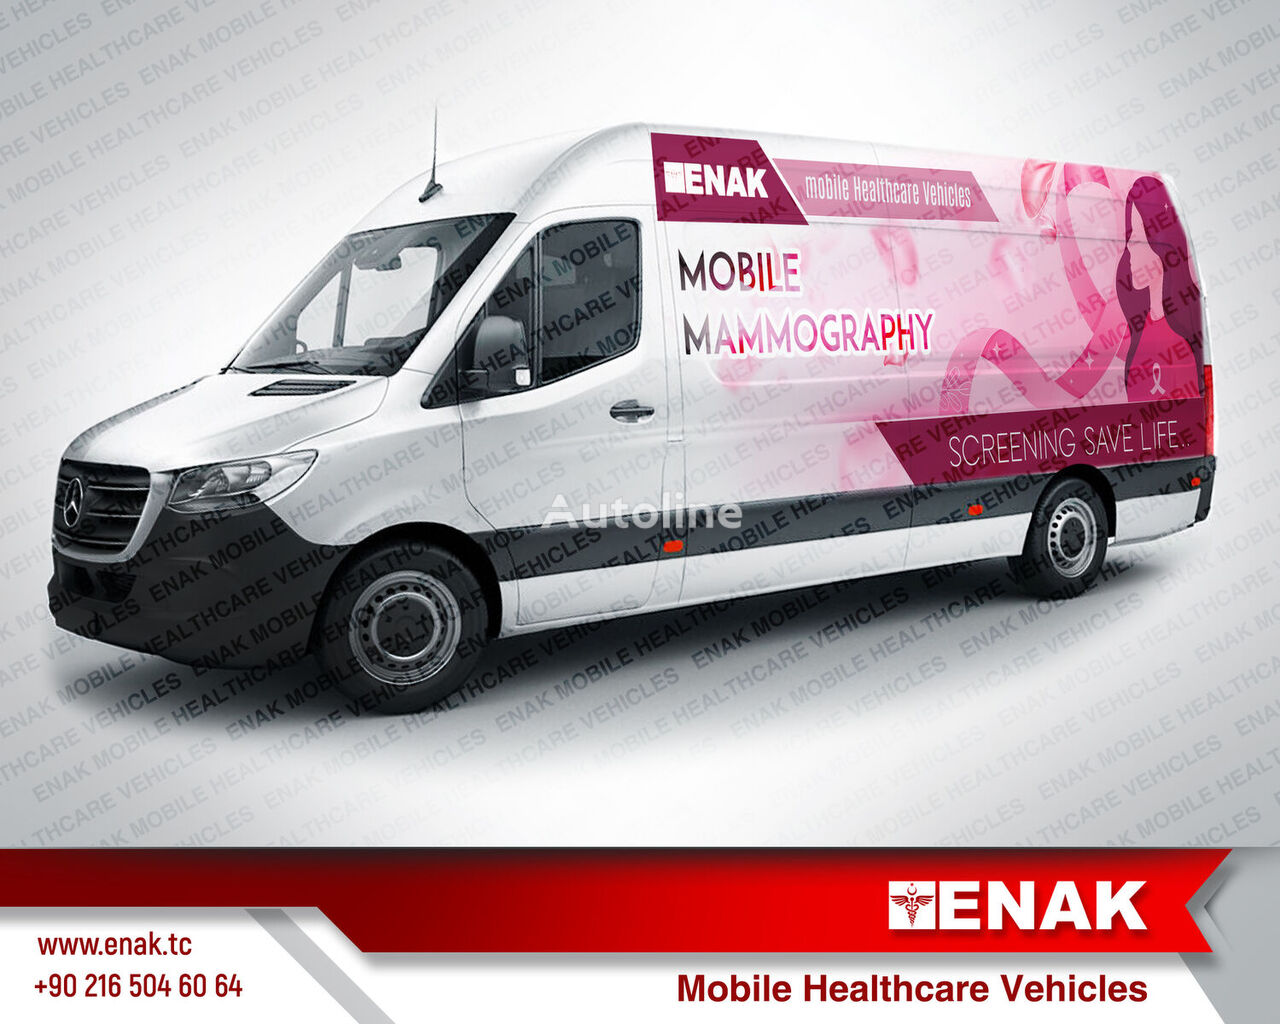 new Mercedes-Benz MOBILE CLINIC MAMOGRAPHY VEHICLE ambulance